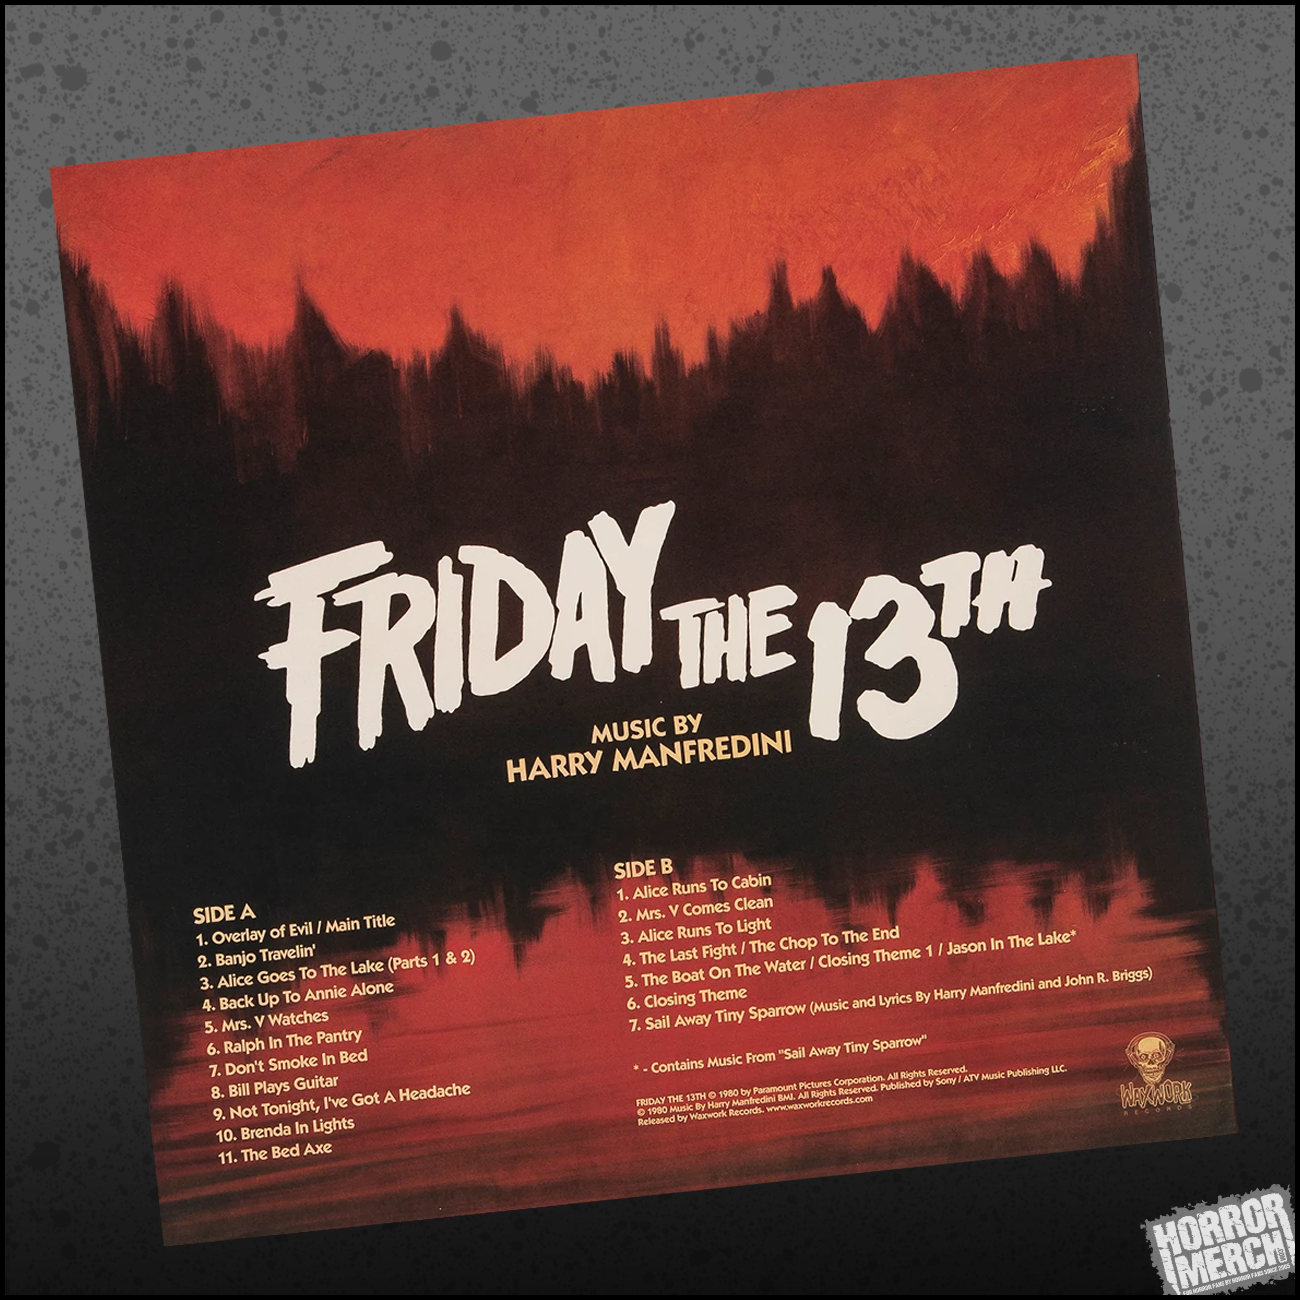 Friday The 13th [Soundtrack] - Free Shipping!